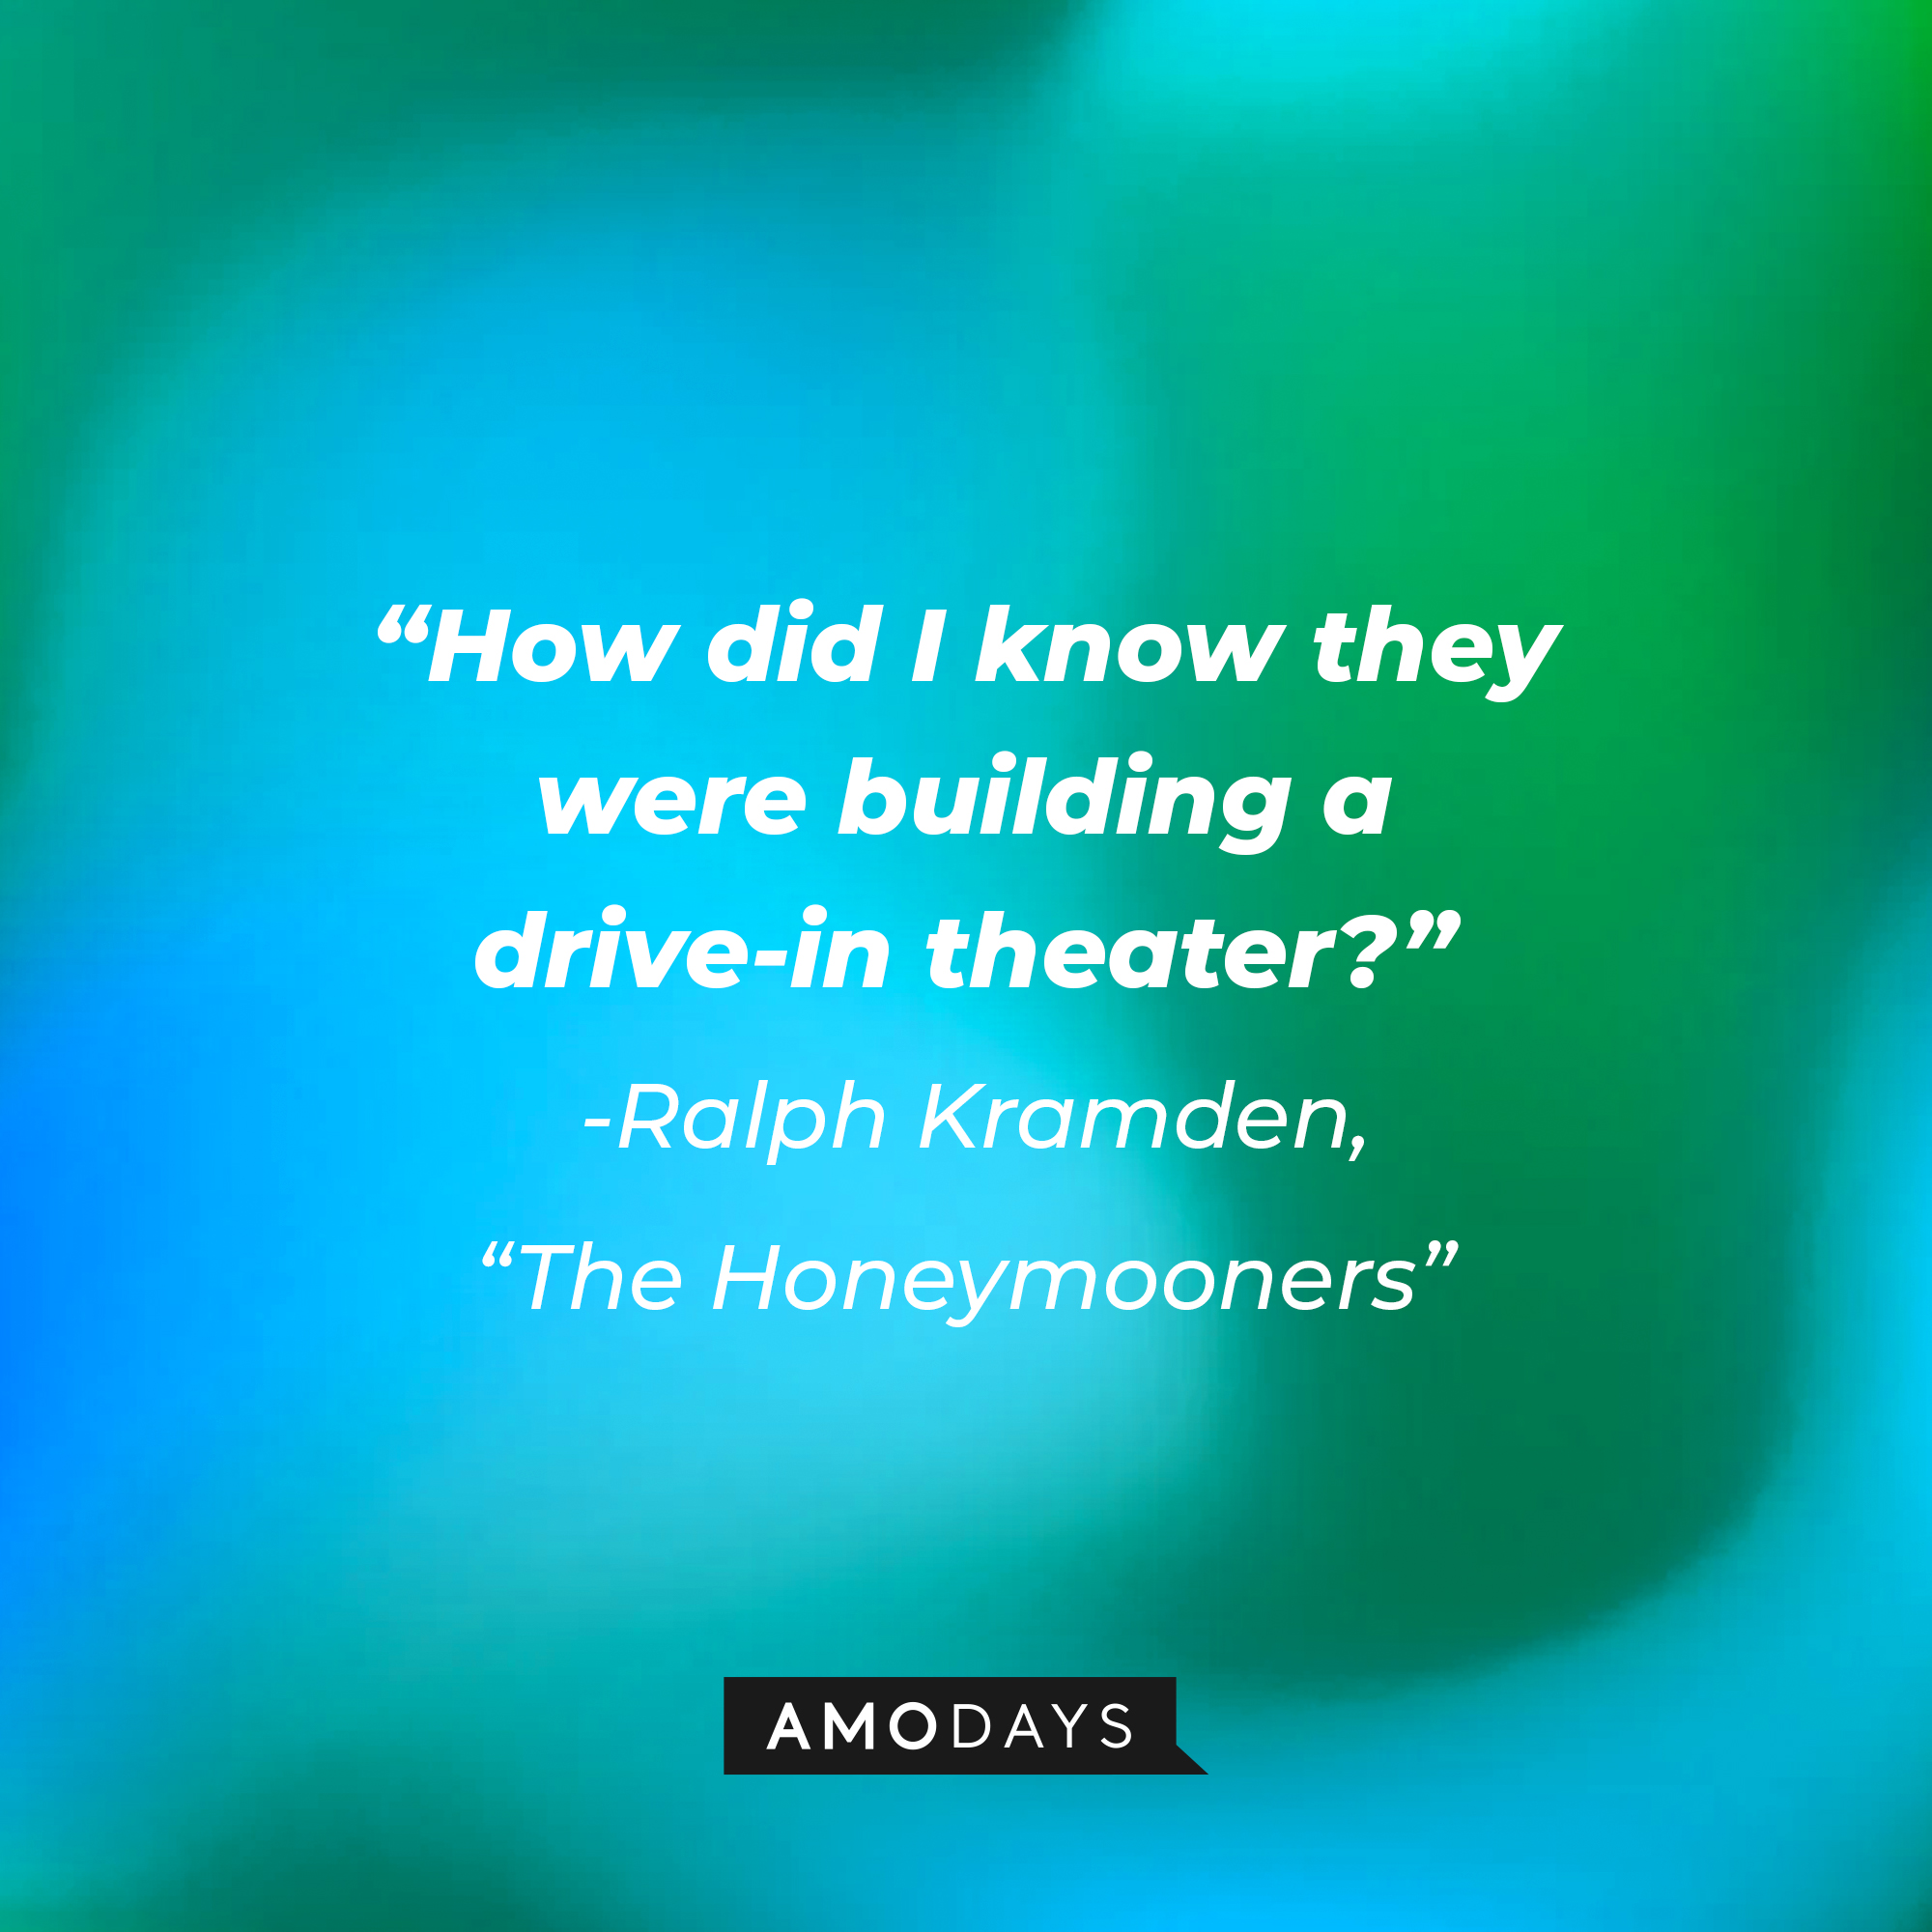 A quote from "The Honeymooners" star Ralph Kramden: "How did I know they were building a drive-in theater?" | Source: AmoDays